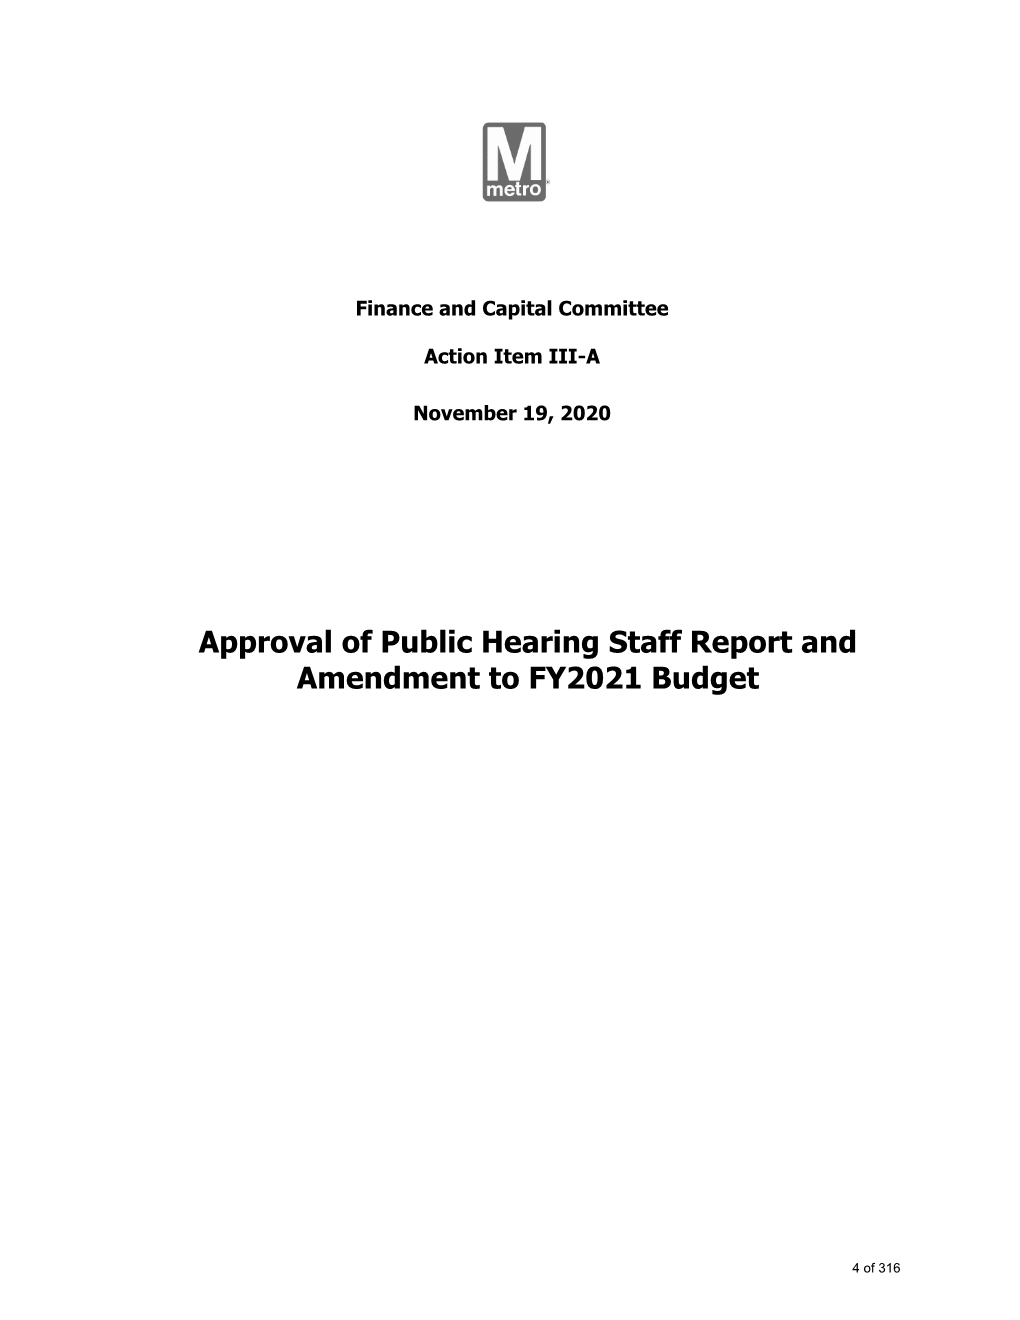 Approval of Public Hearing Staff Report and Amendment to FY2021 Budget